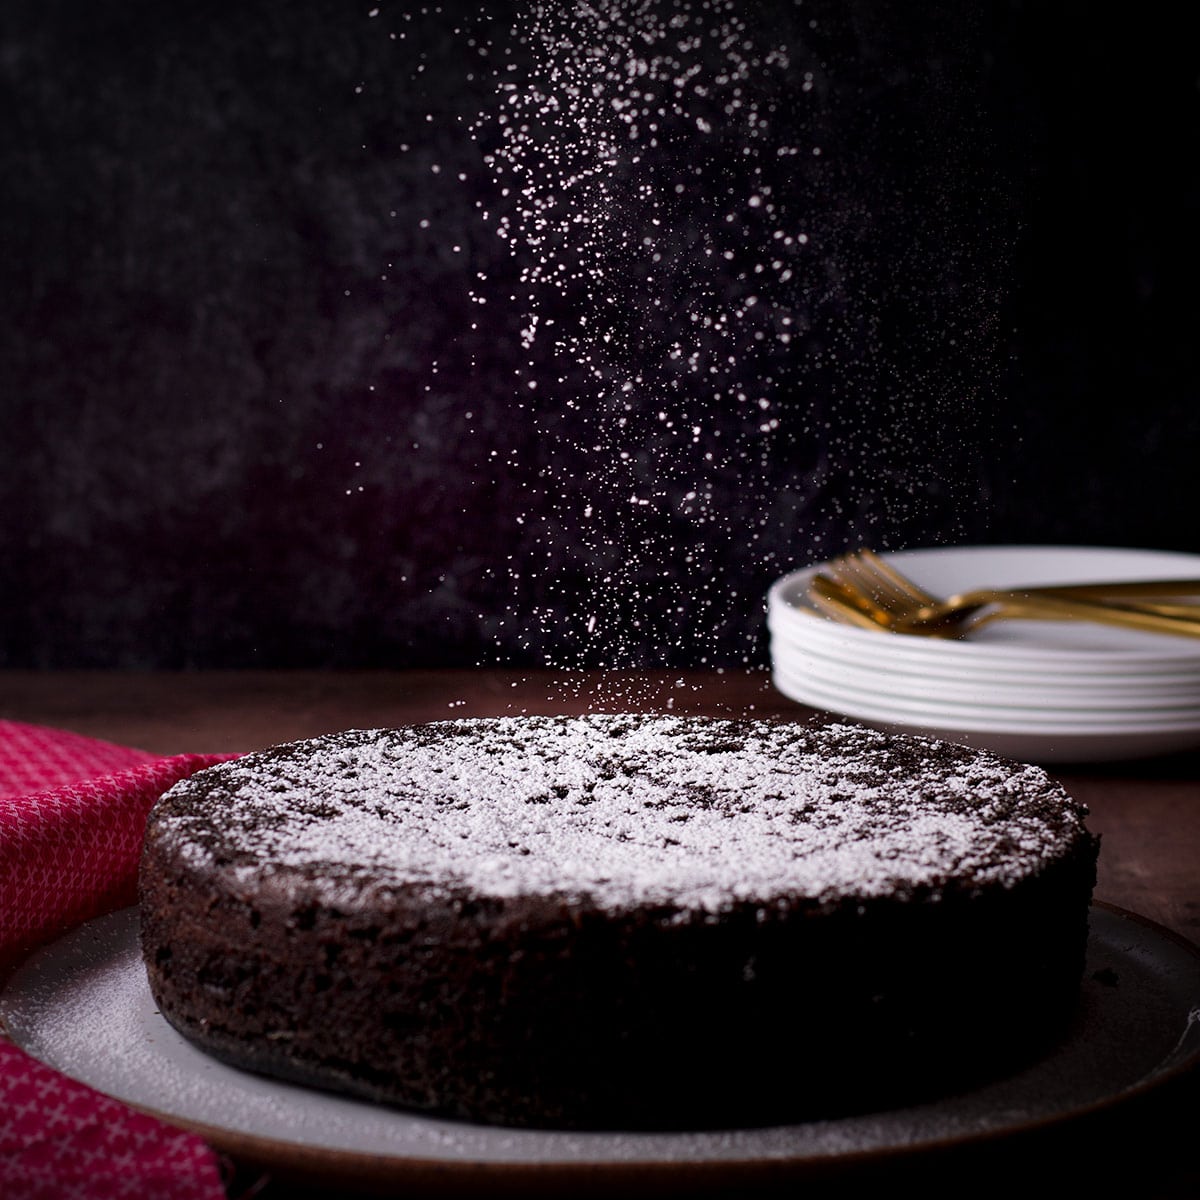 Sprinkling powdered sugar over the top of a Dutch oven chocolate cake.